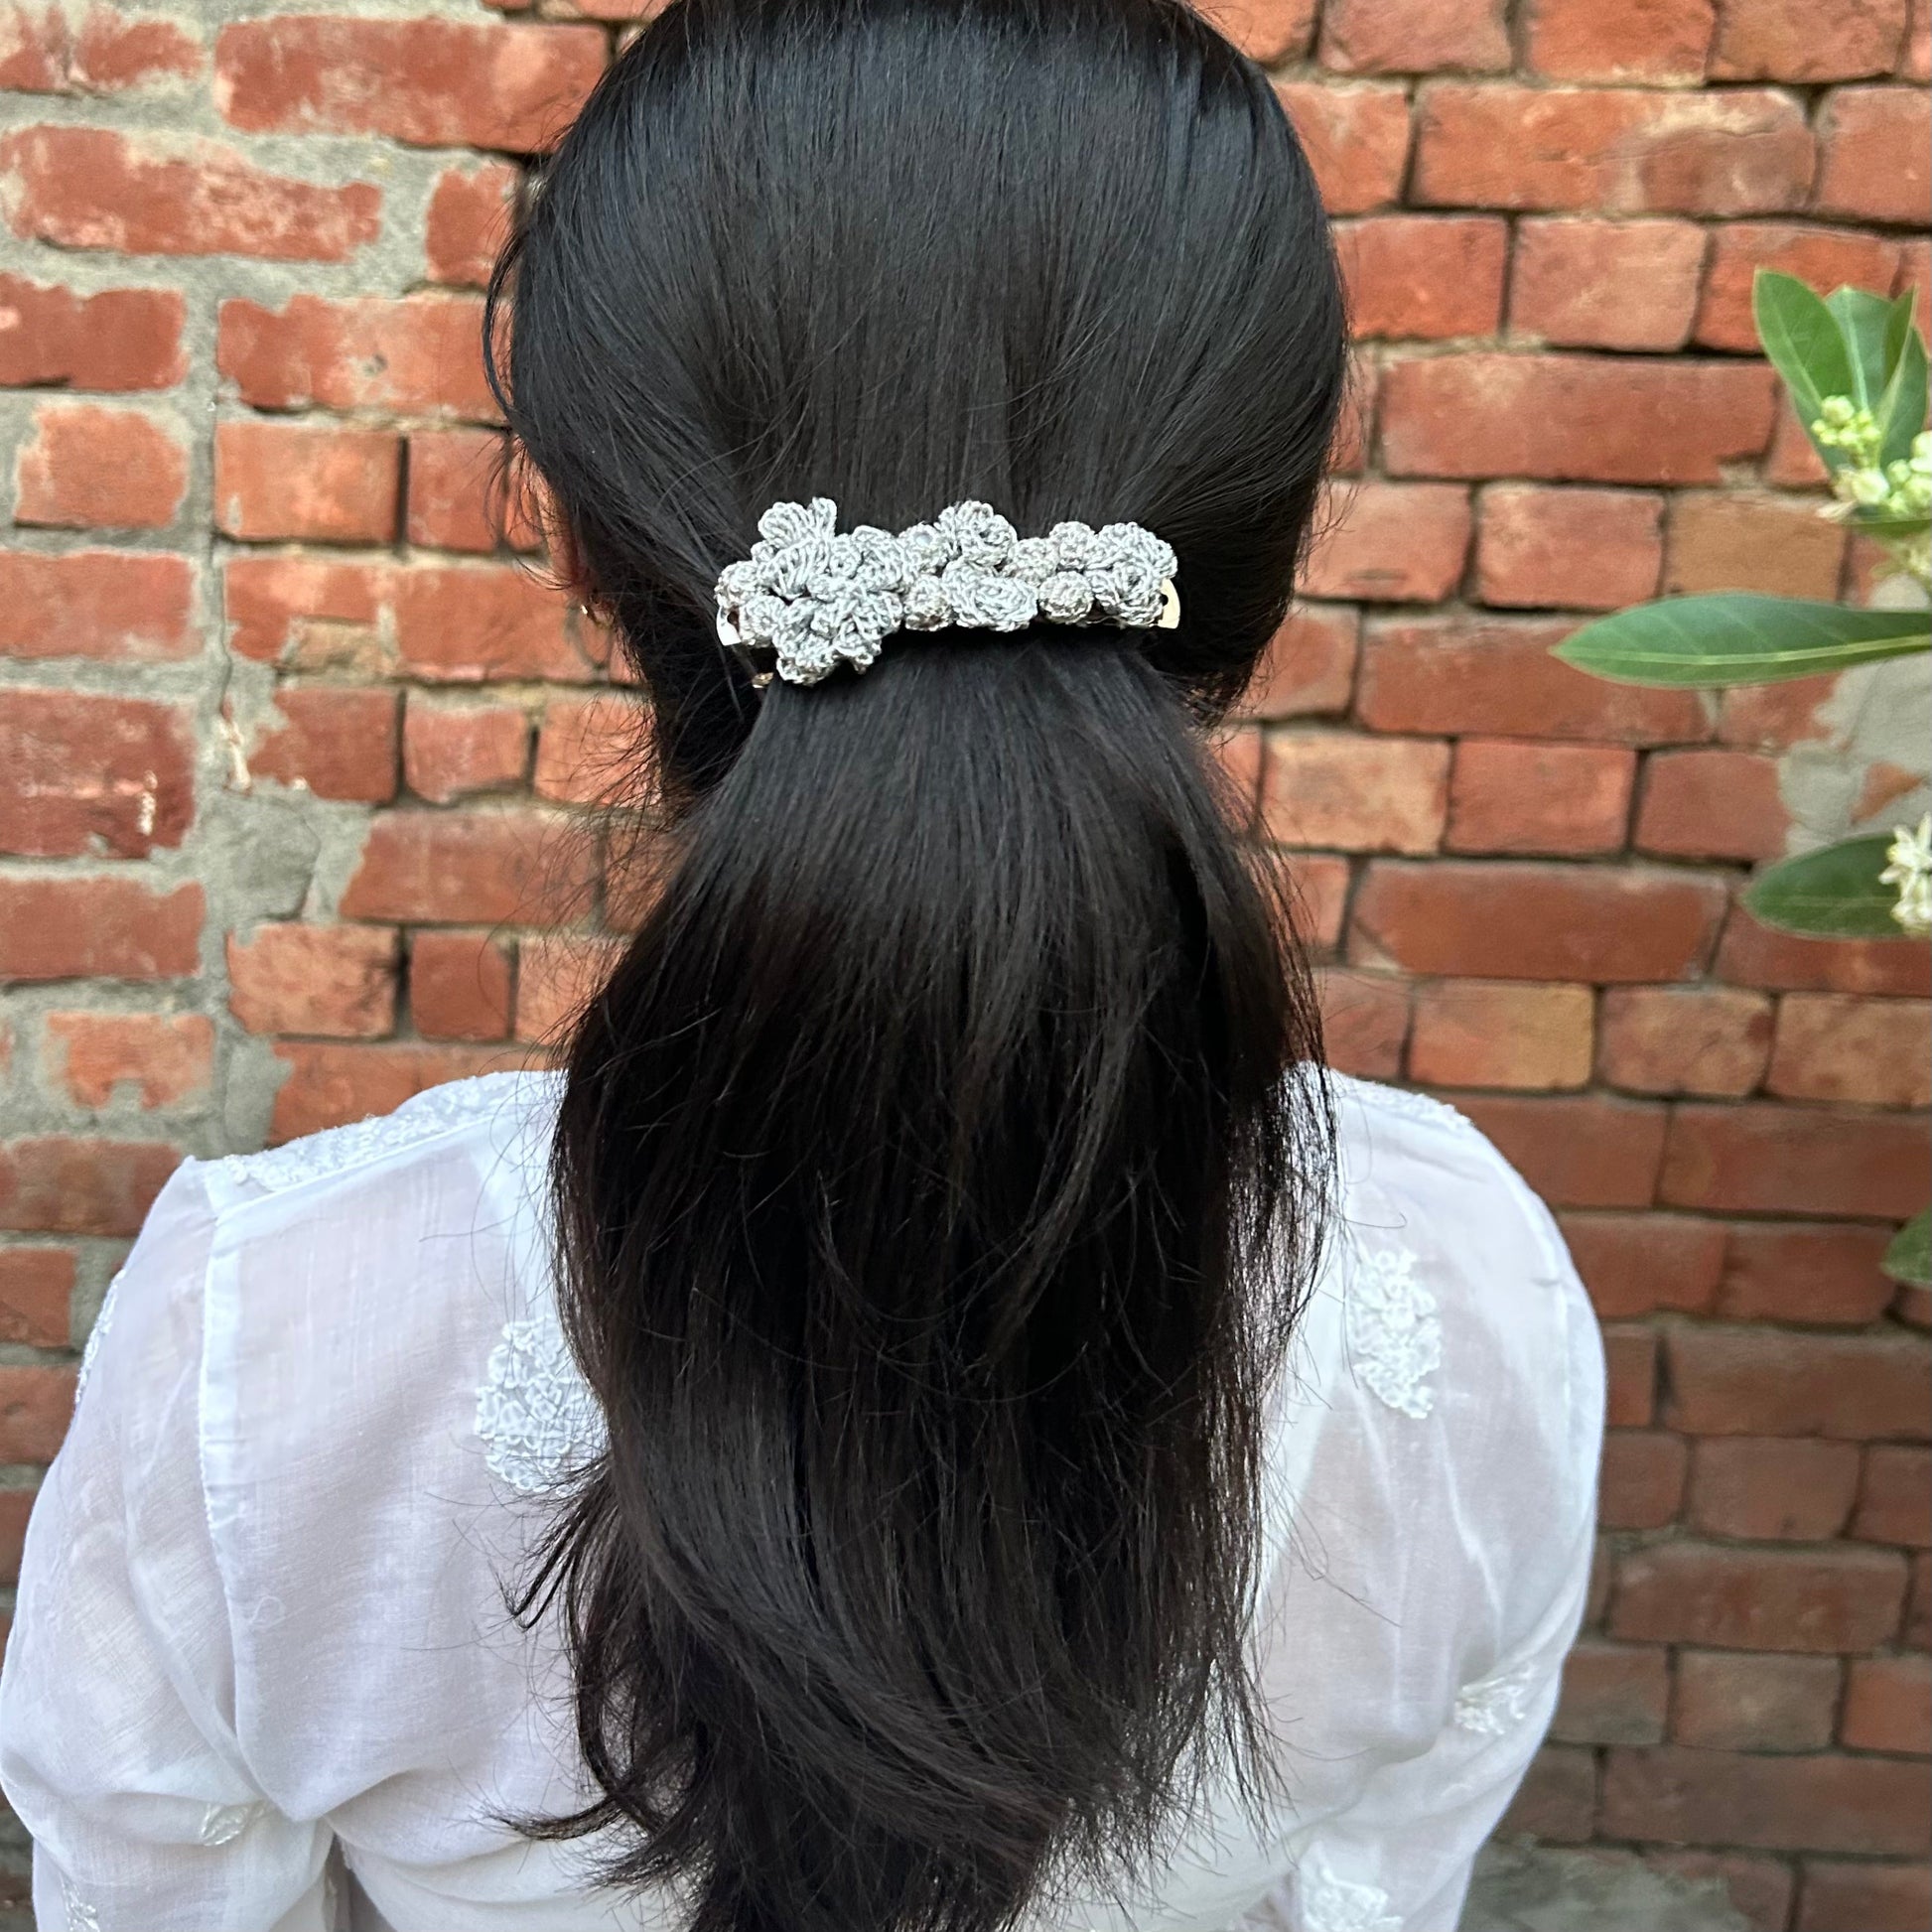 Silver Crochet Hair Clip at Kamakhyaa by Ikriit'm. This item is Accessories, Cotton yarn, Crochet, Free Size, Hair Accessories, Ikriit'm, Natural, Silver